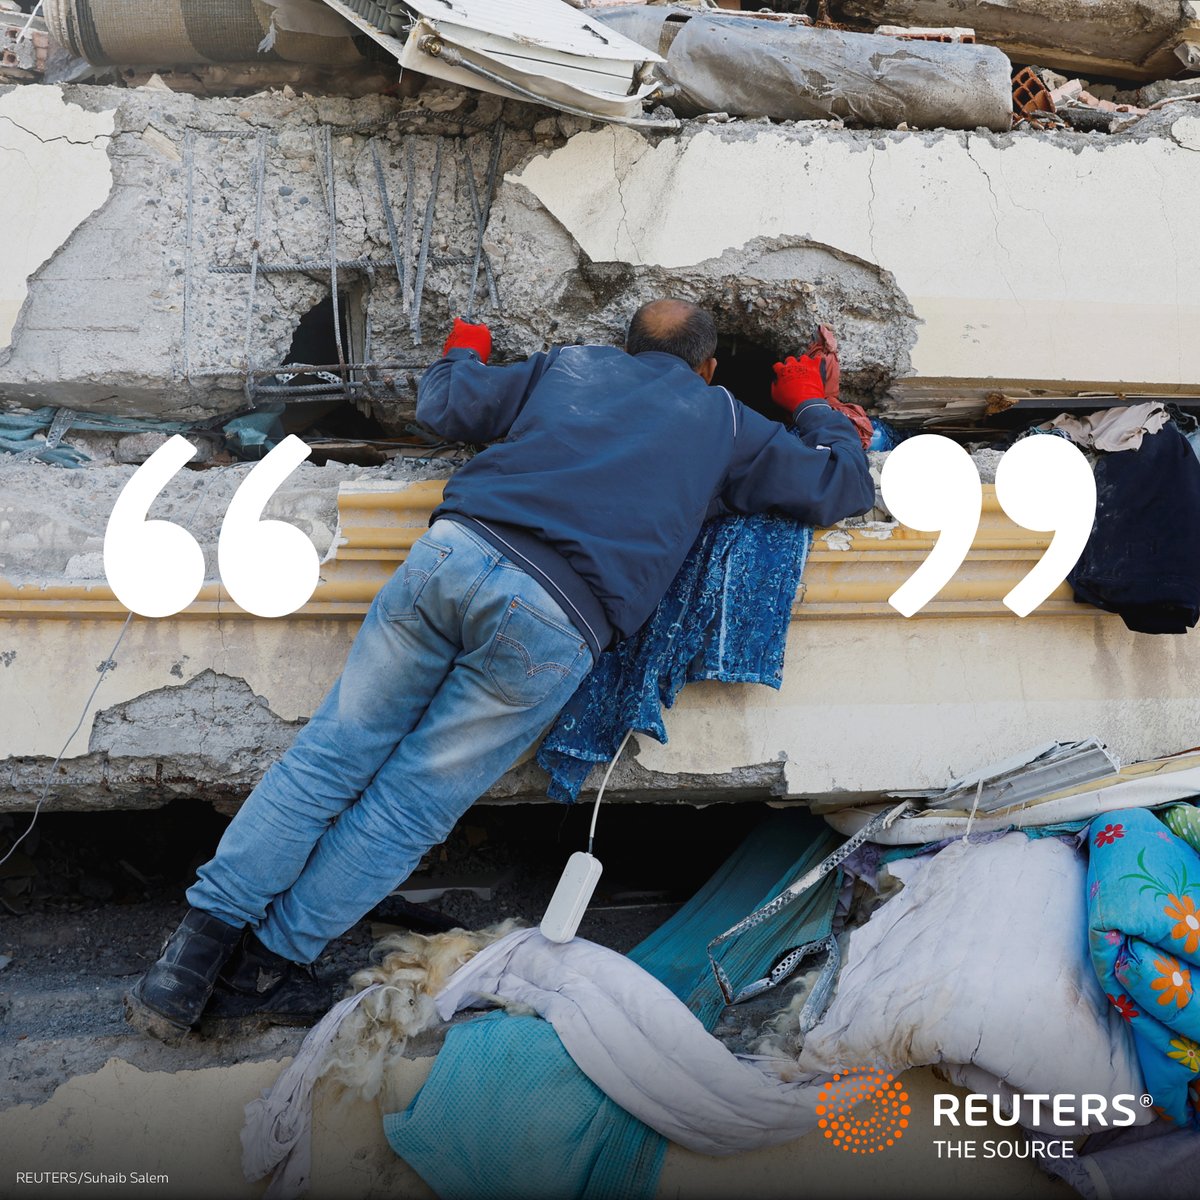 Searching for life in the rubble. Earthquake, Kahramanmaras, Turkey. The world’s most dramatic events, told without agenda or bias. Reuters: The Source – where the story speaks for itself.  